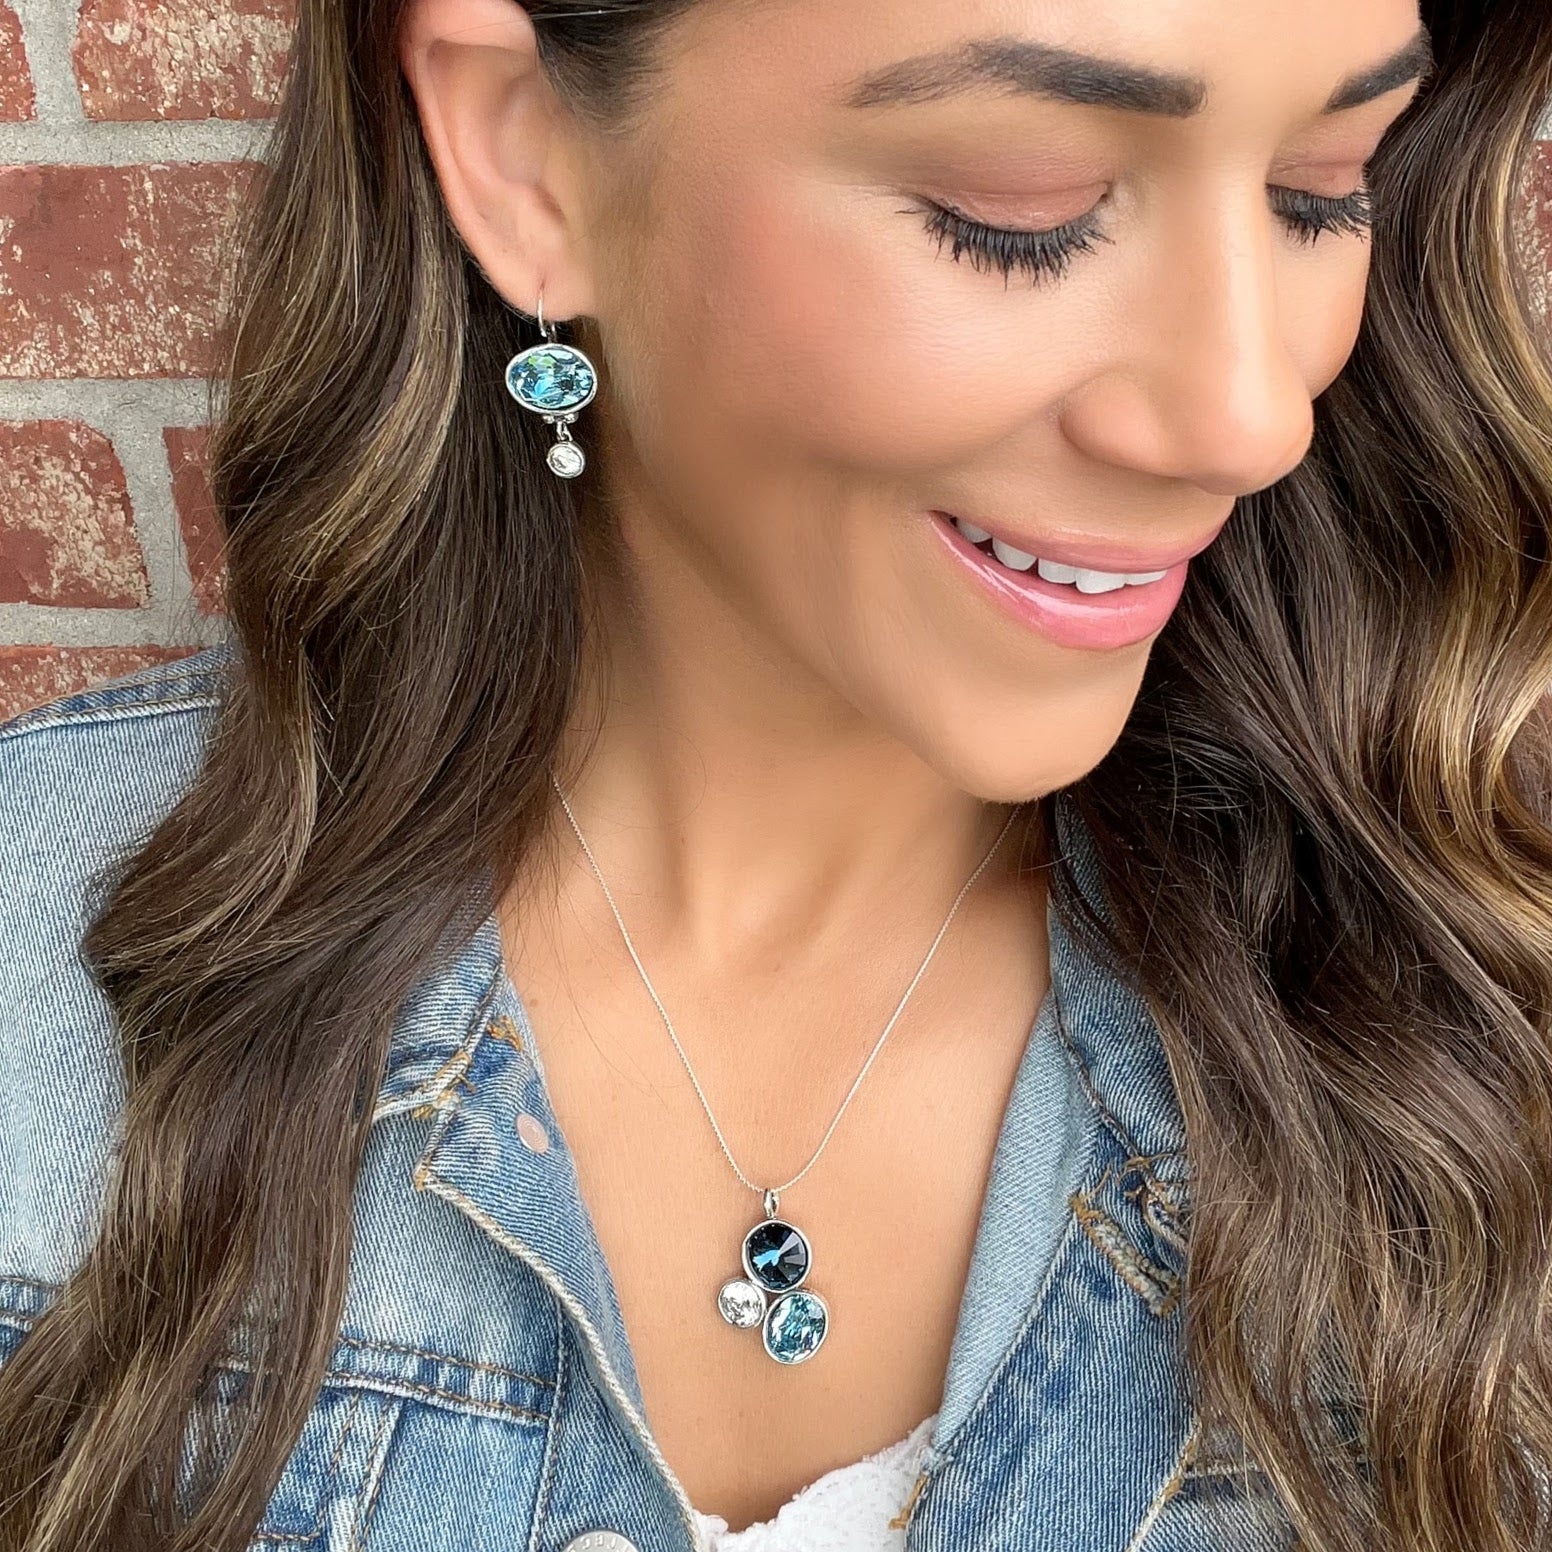 Blue Bayou Earrings worn with matching Blue Bayou Necklace